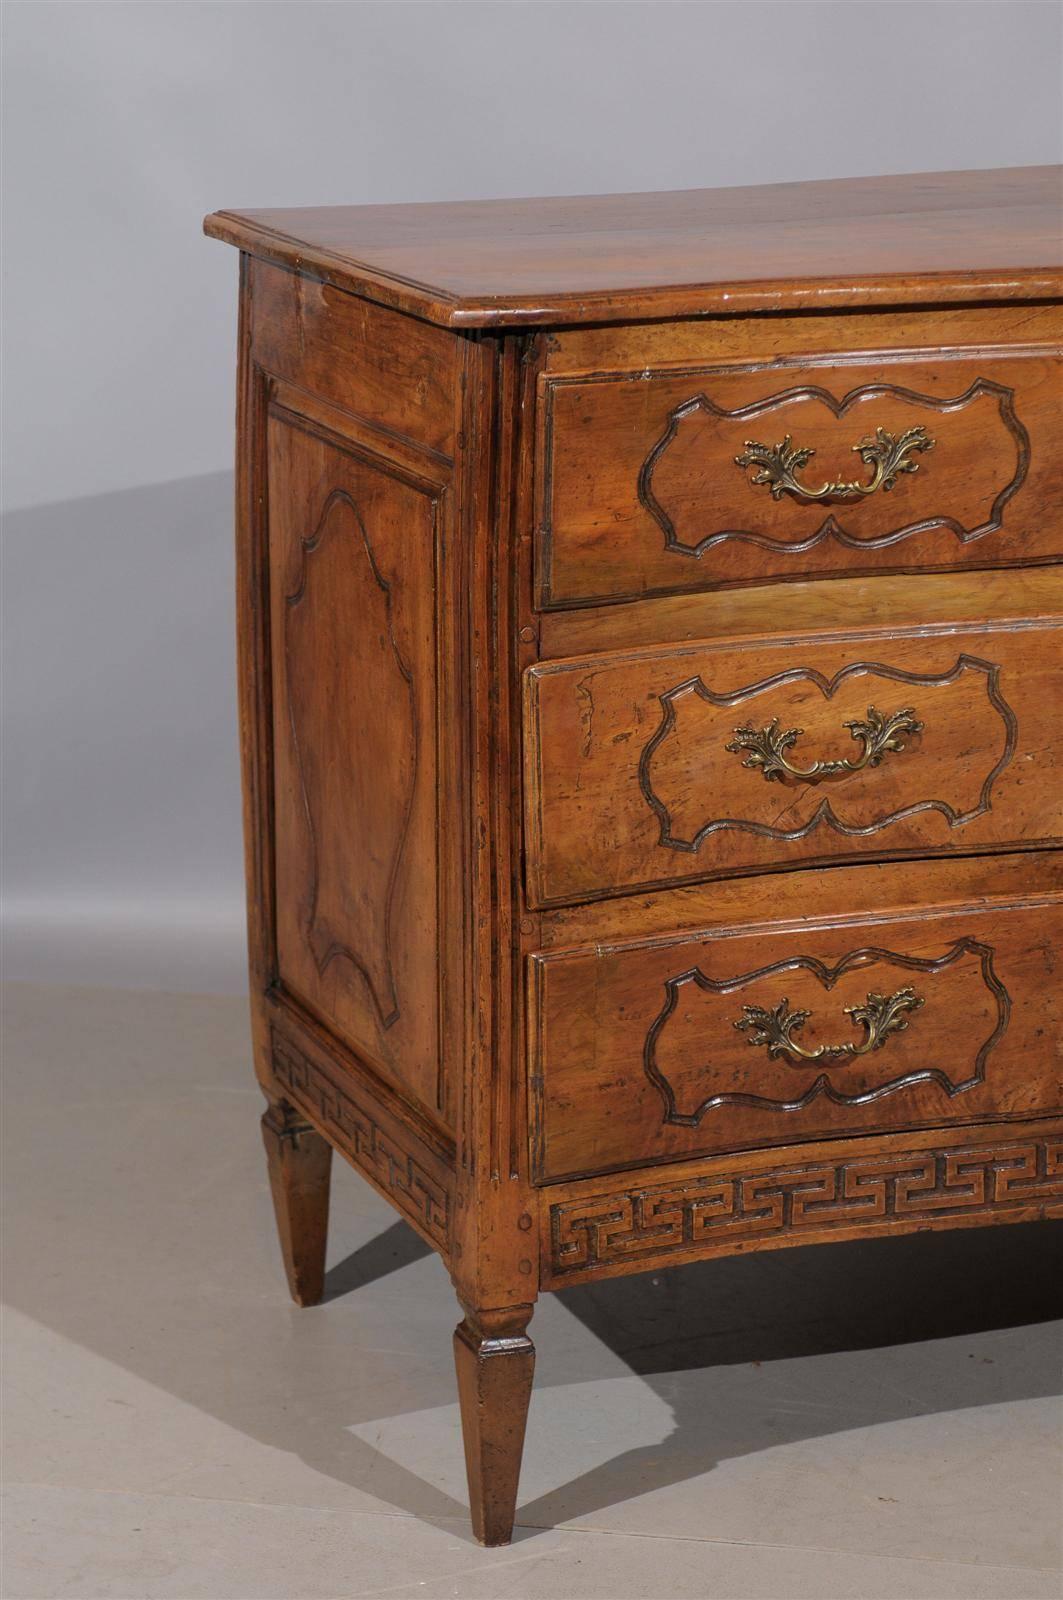 Italian Transitional Walnut Commode with Greek Key Carving, Late 18th Century 2